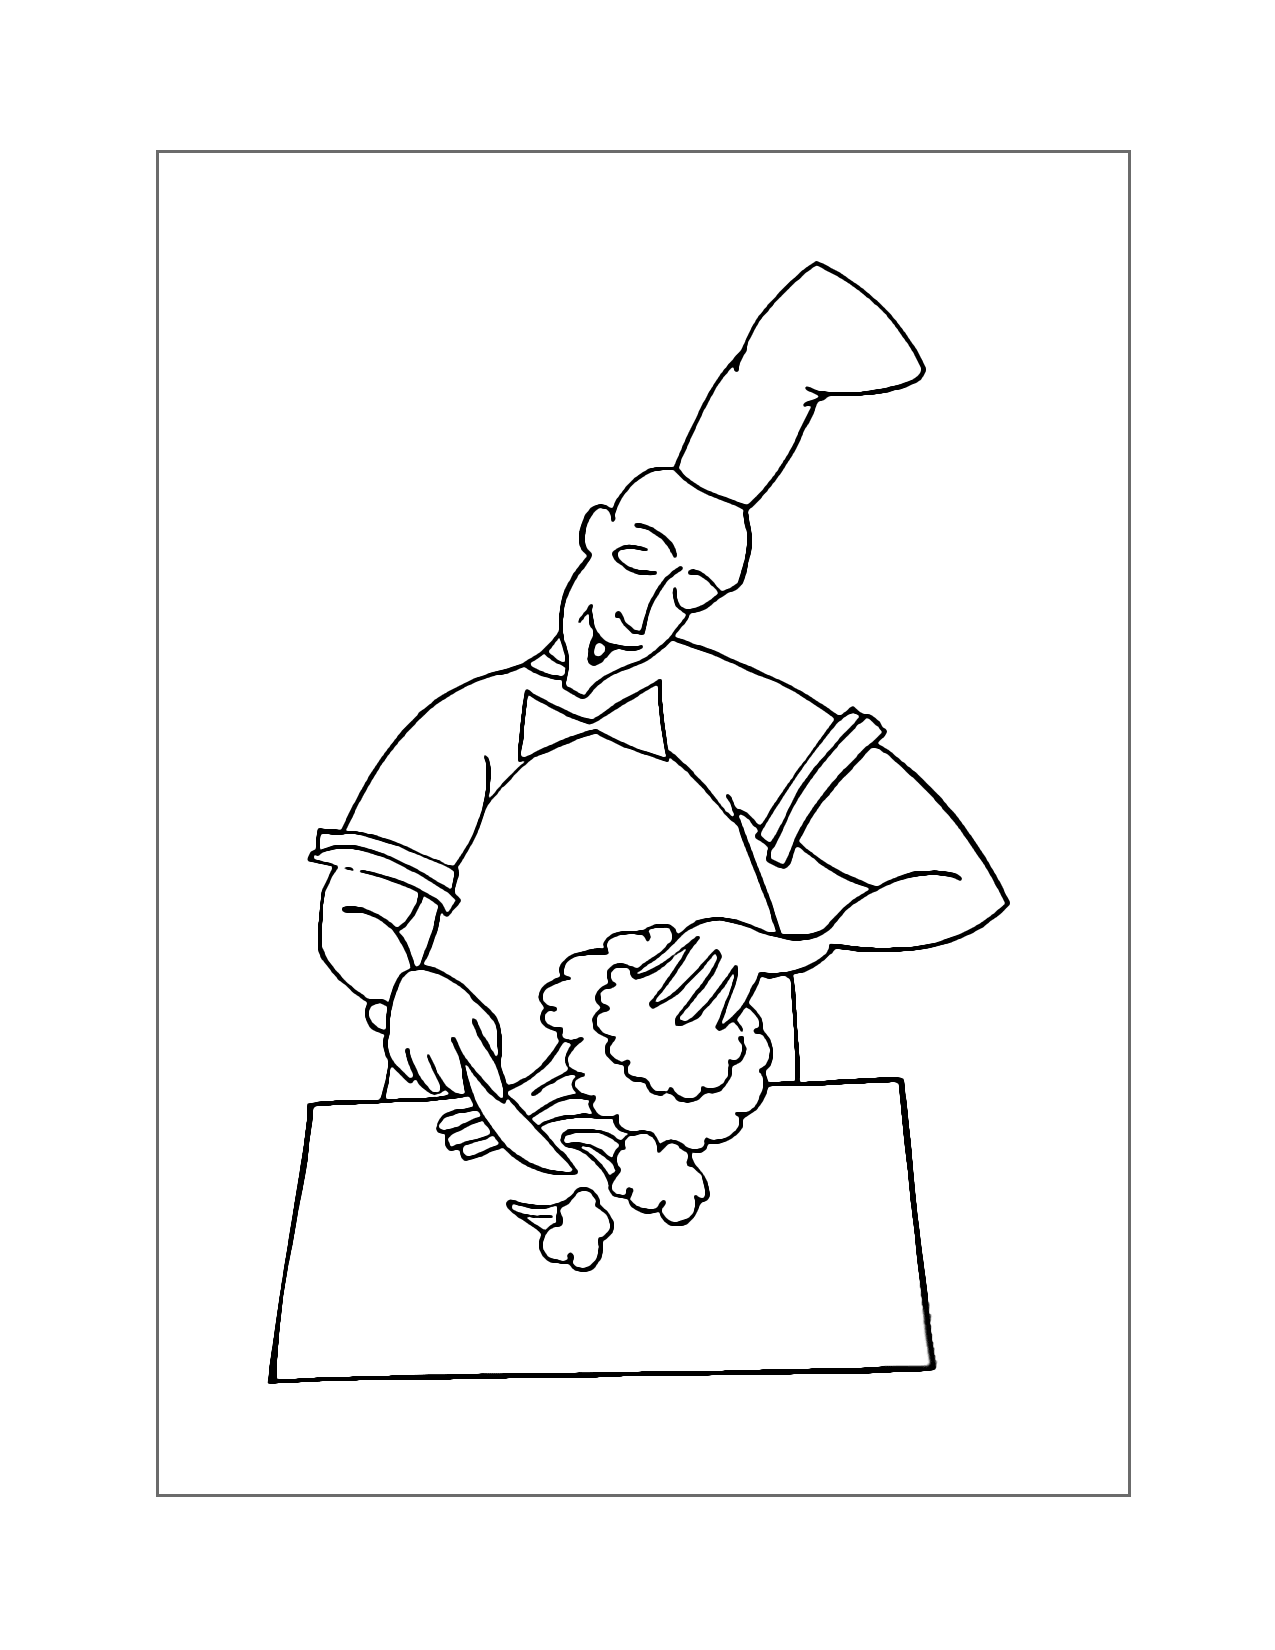 Chef Cutting Broccoli Coloring Page